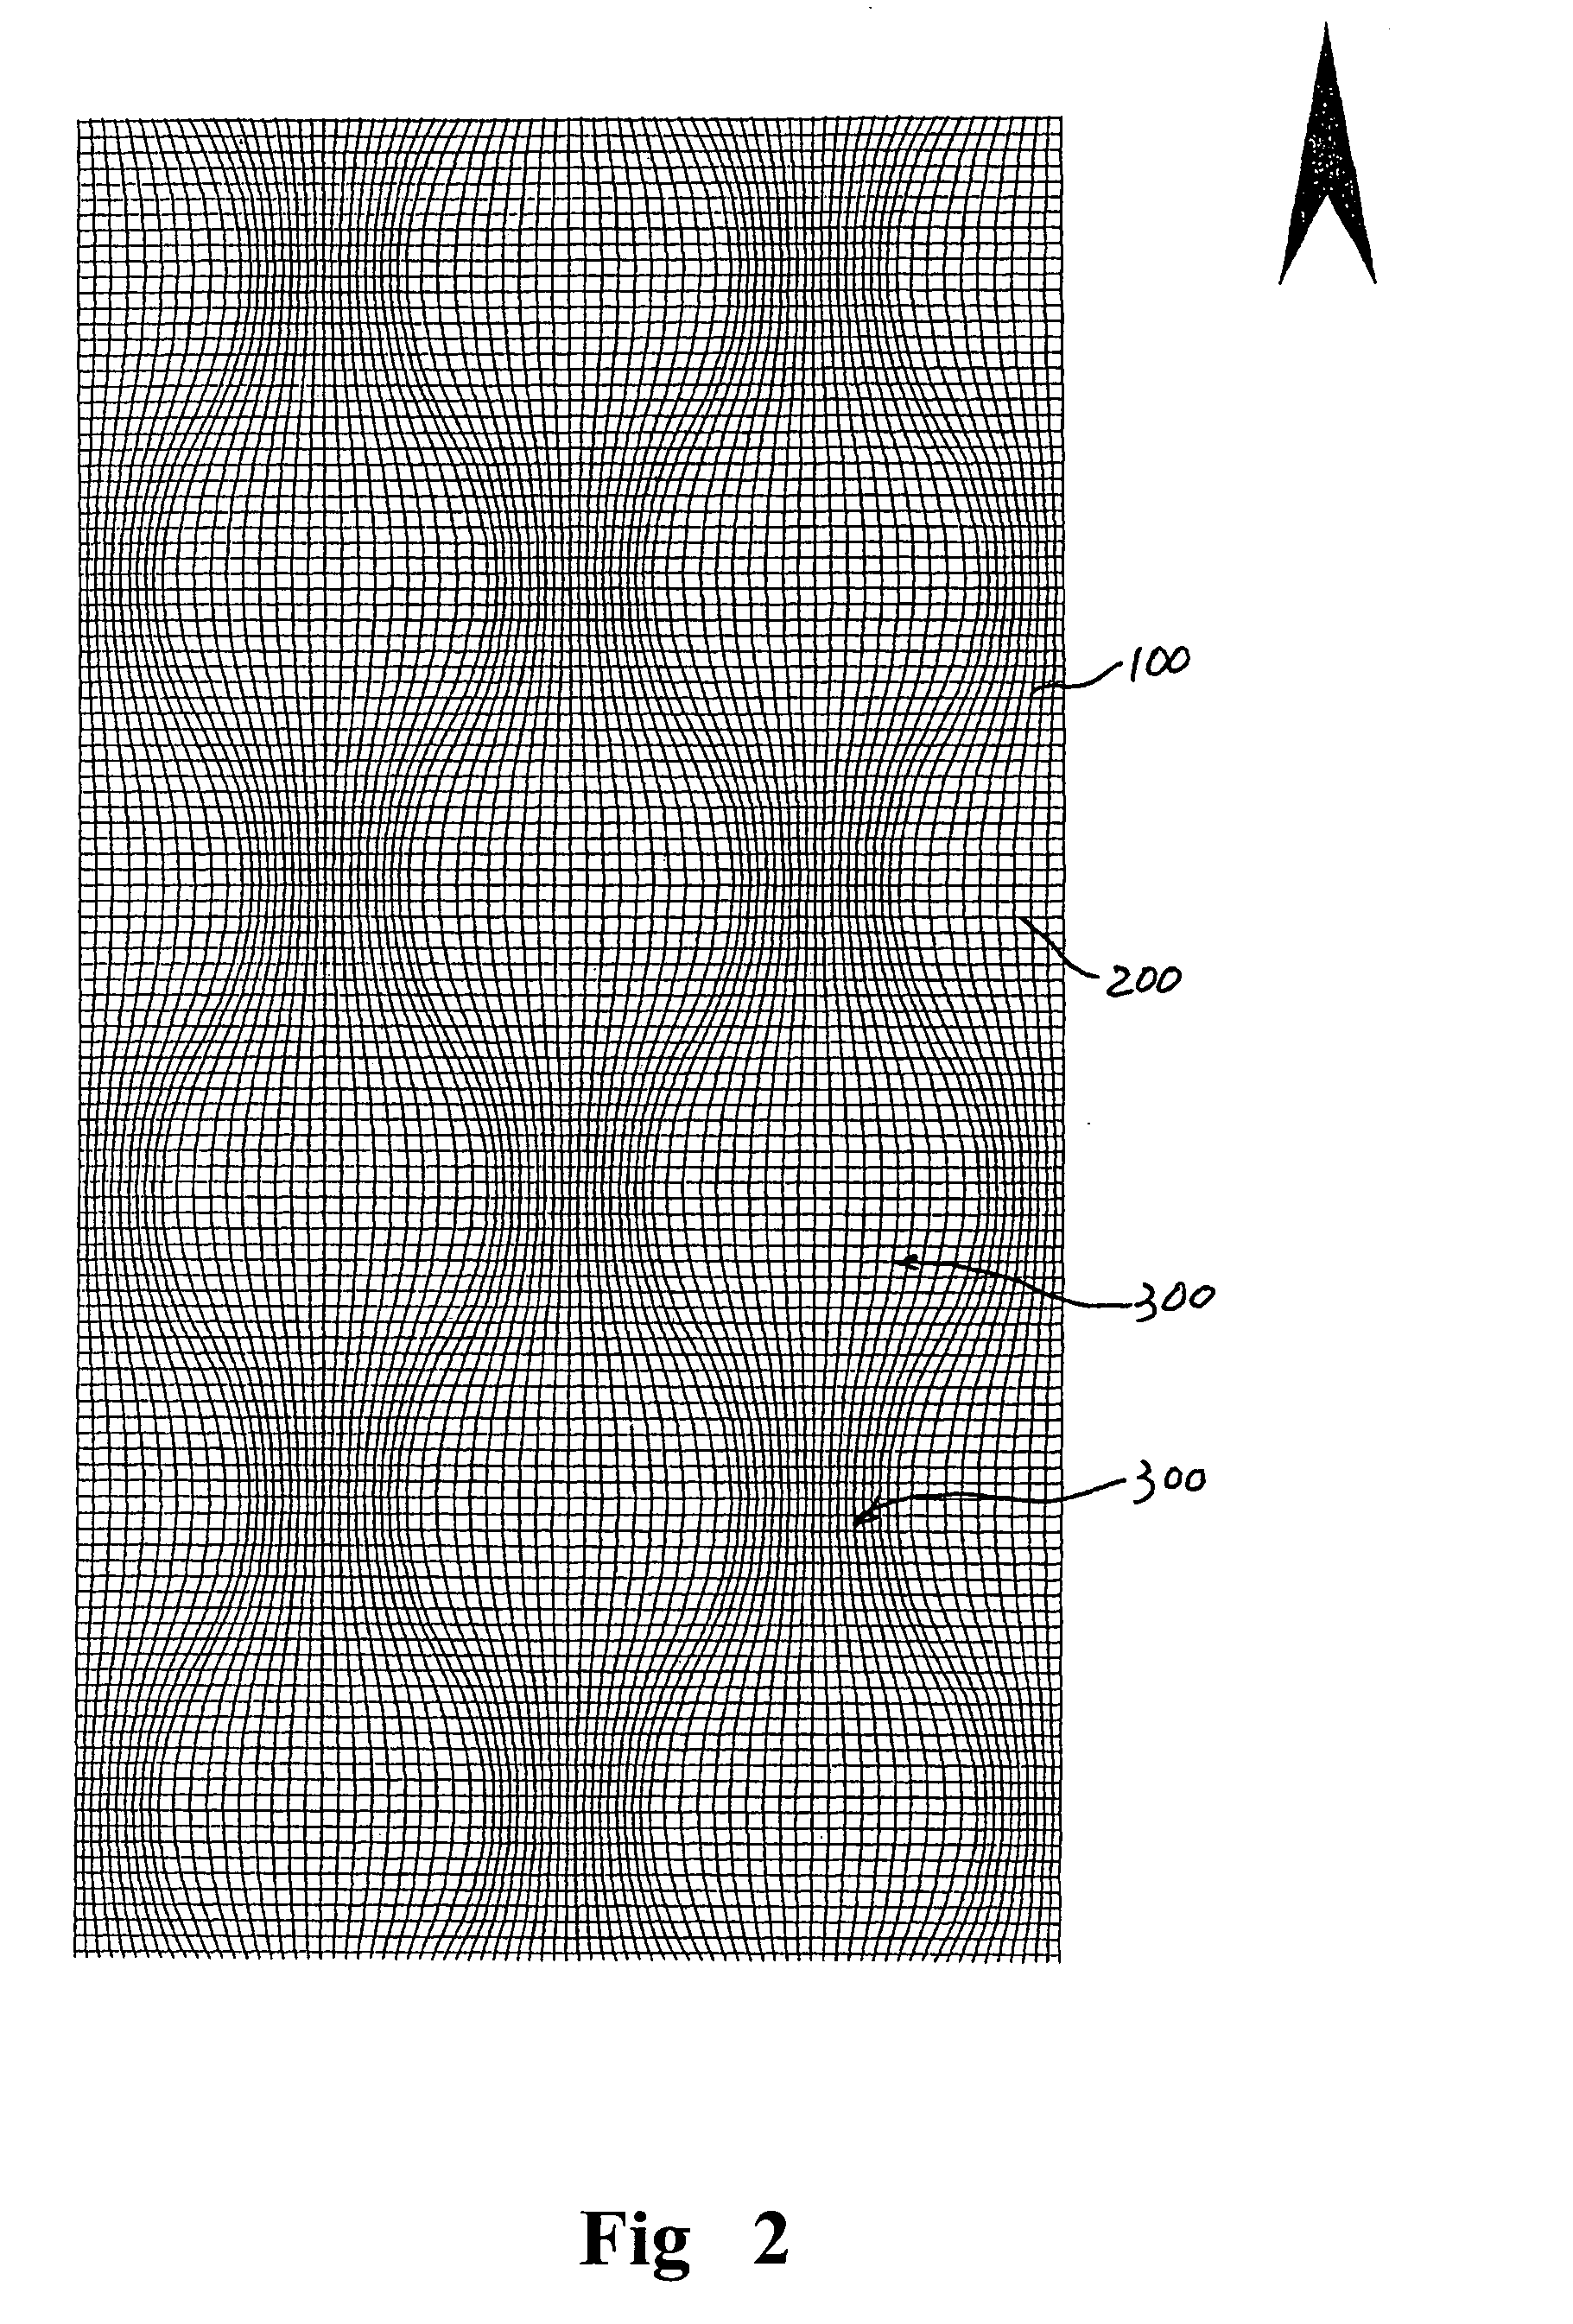 Method for weaving curved warp yarns and a woven fabric